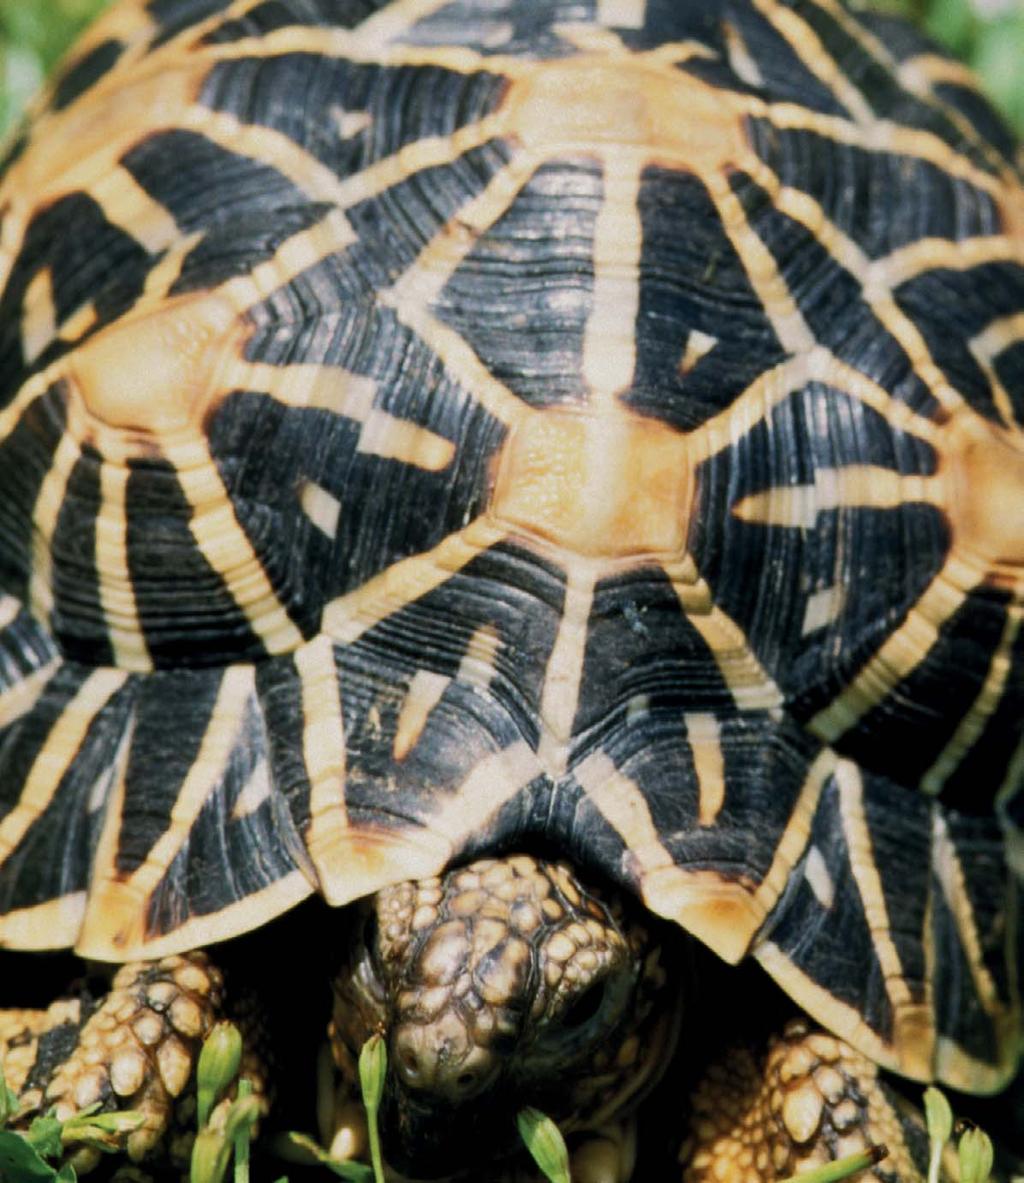 TRAFFIC R E P O R T SLOW AND STEADY: The Global Footprint of Jakarta s Tortoise and Freshwater Turtle Trade MARCH